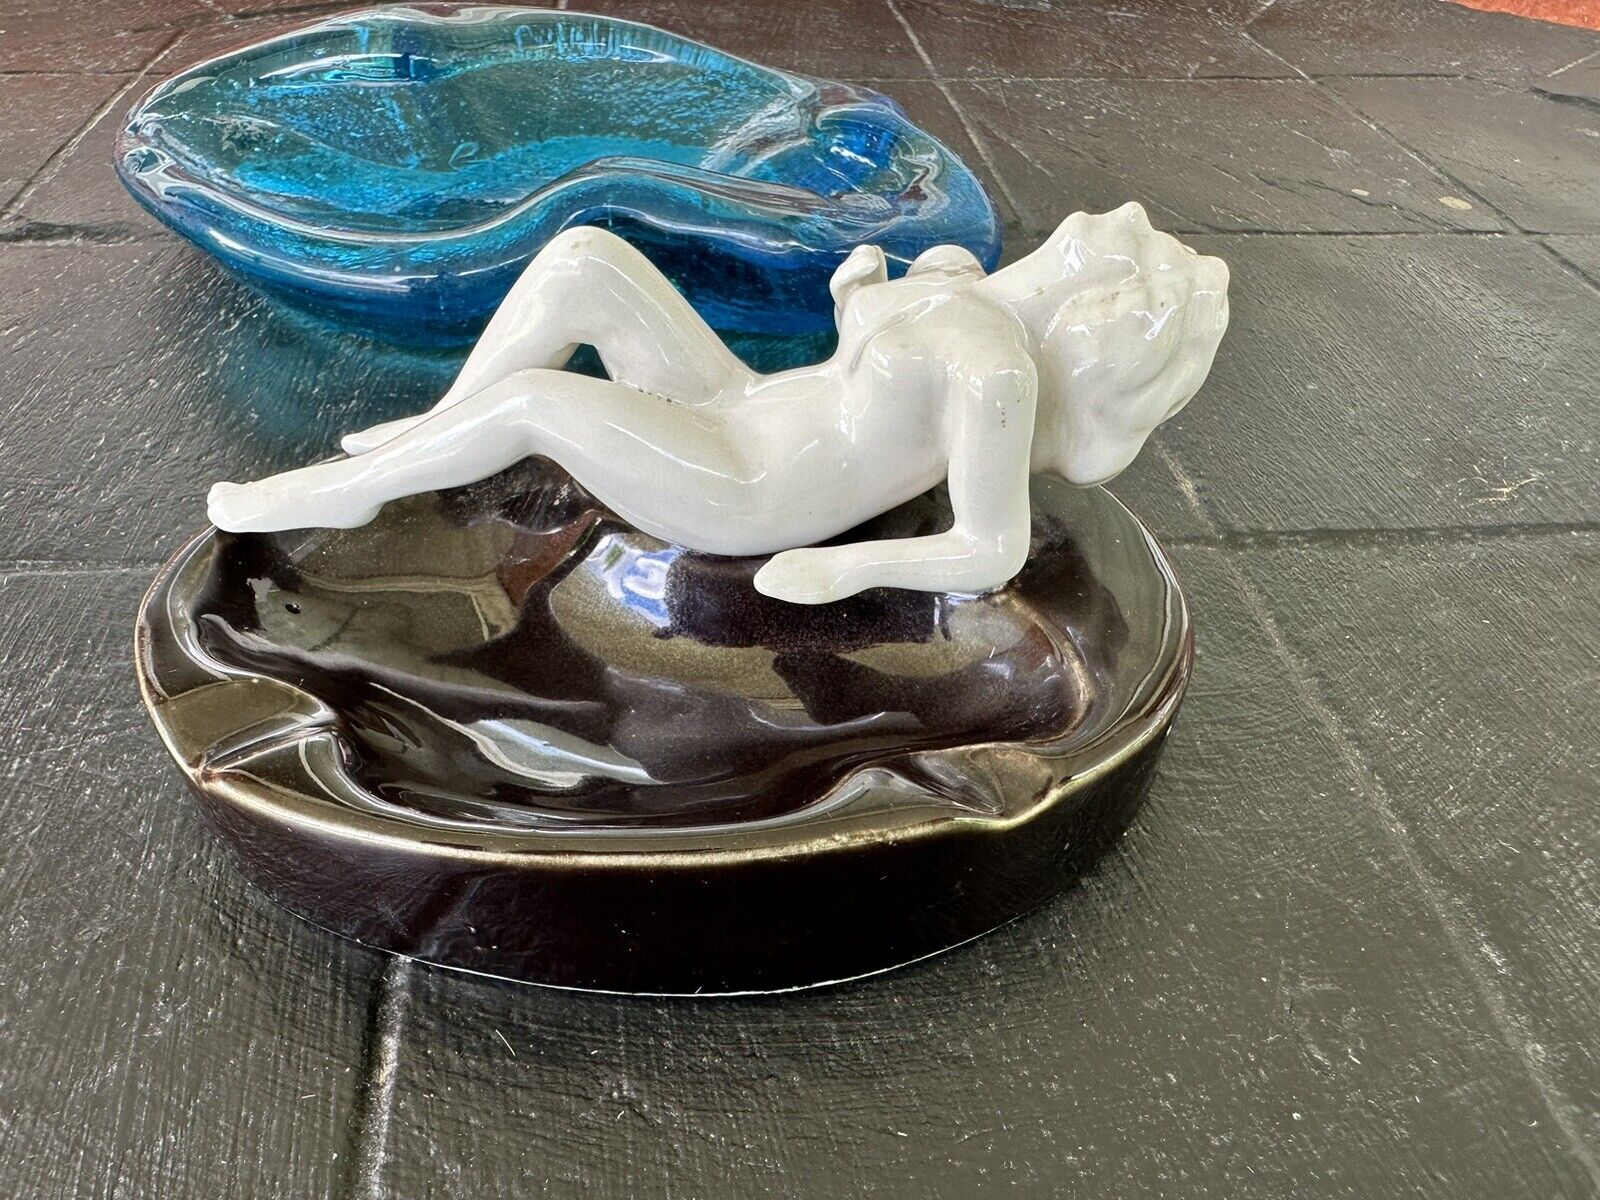 Vintage 1950s-60s PIN-UP NUDE LADY ASHTRAY MCM WOMEN